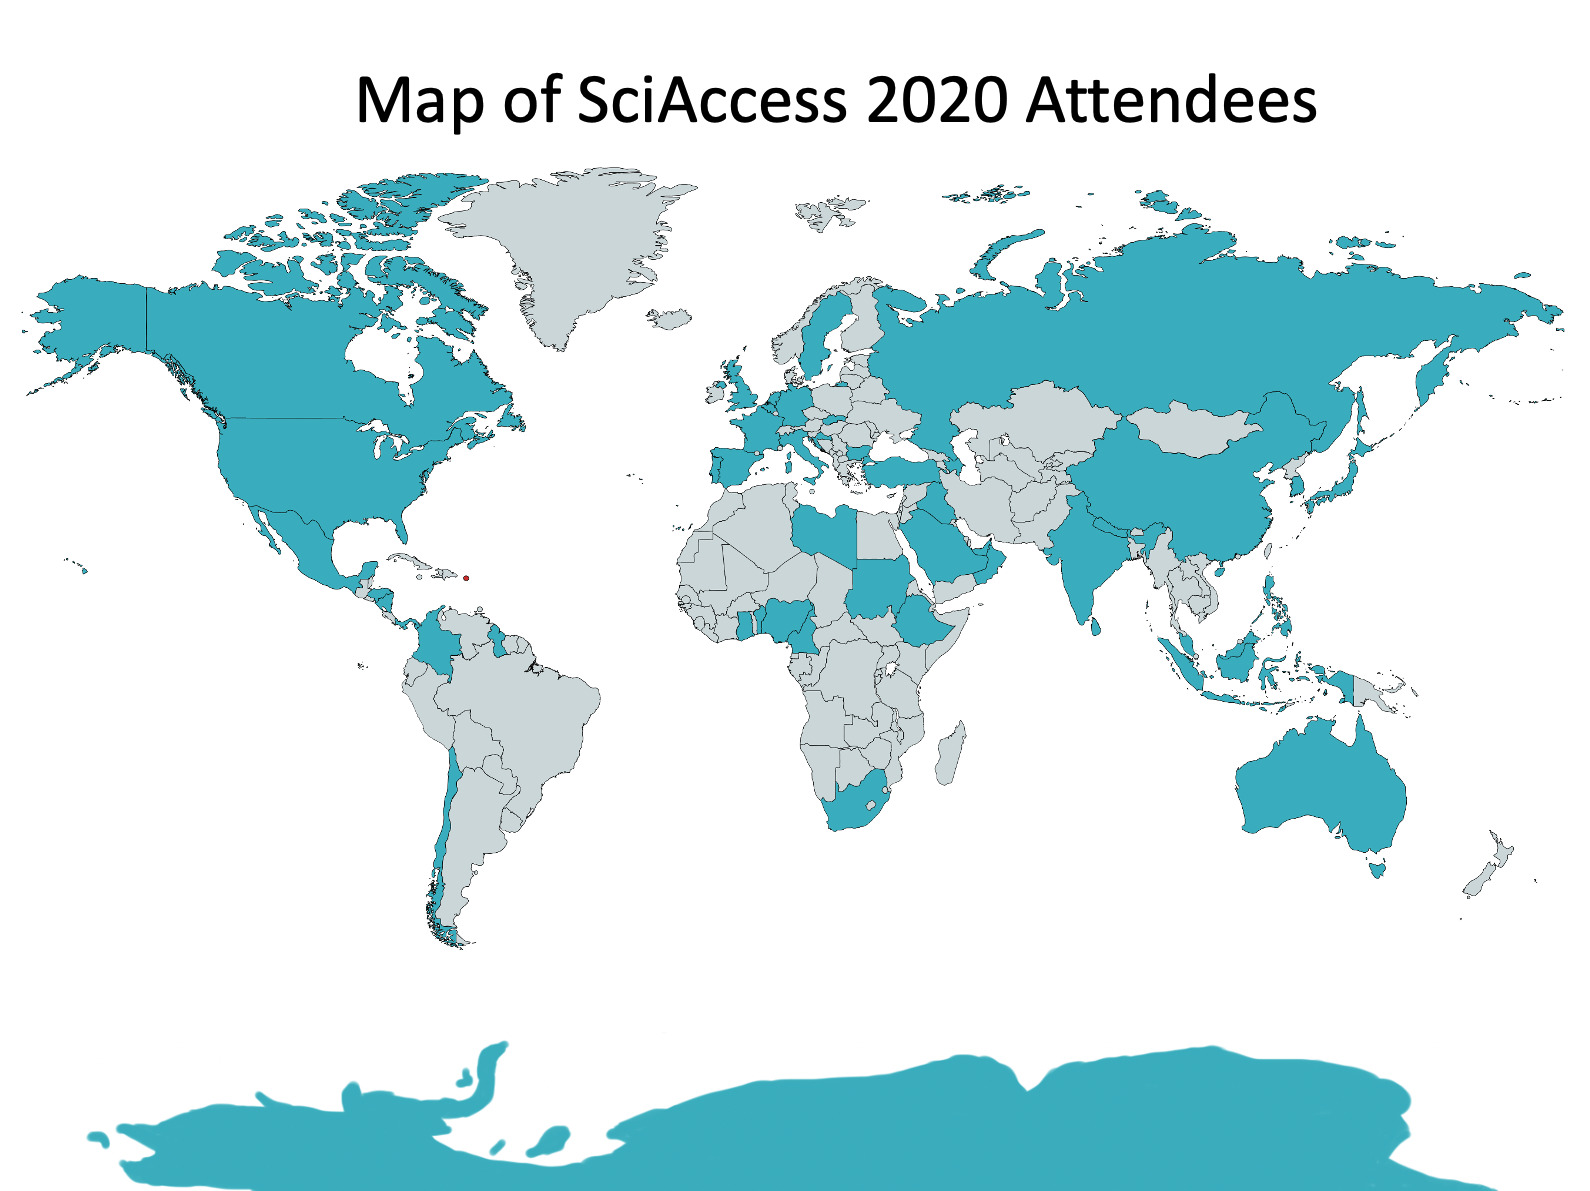 Shown in blue are countries in which participants attended SciAccess 2020 from, including several neutrino scientists in Antartica.